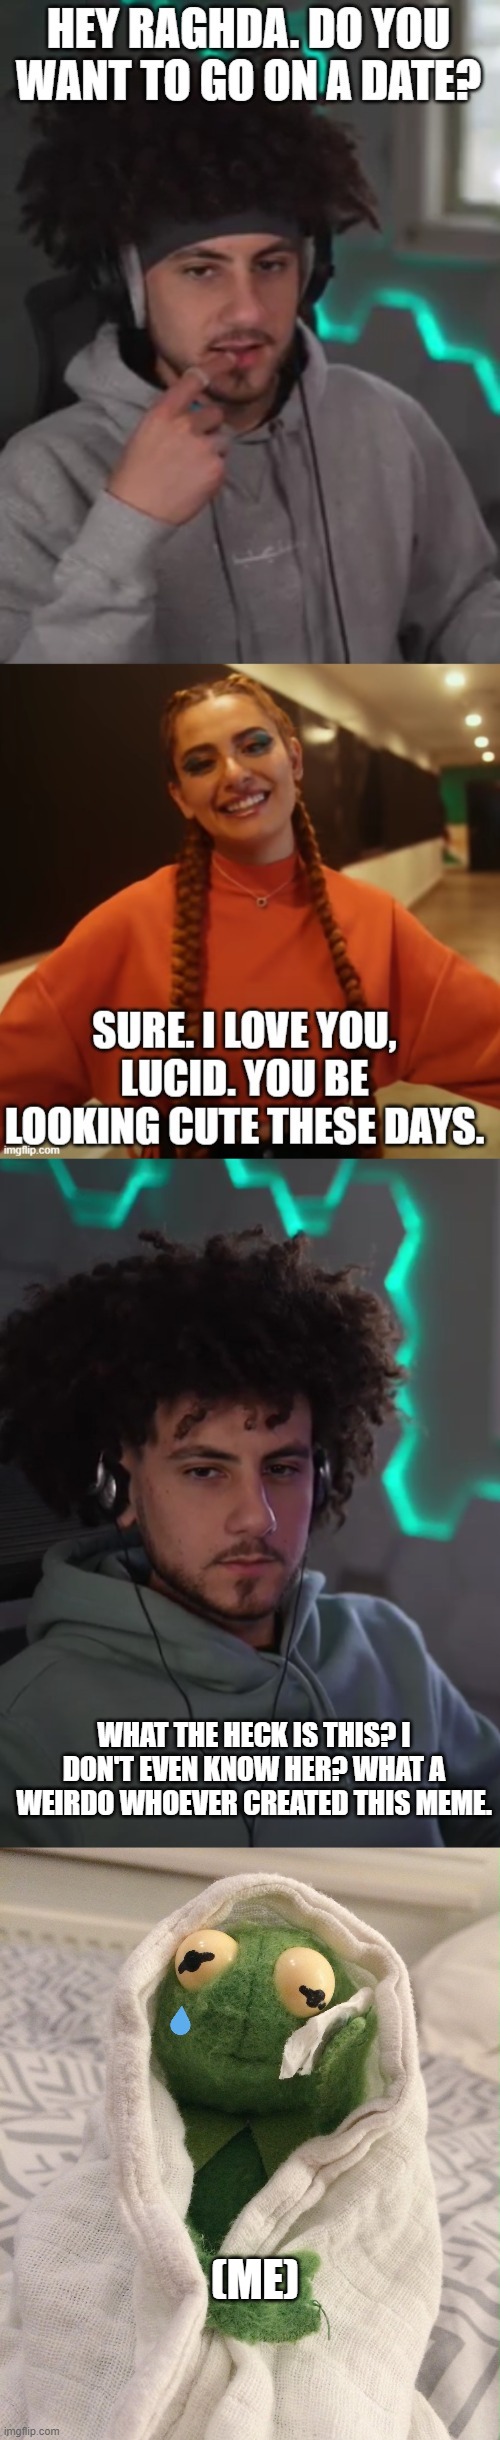 If Lucid Reacted To My Meme | WHAT THE HECK IS THIS? I DON'T EVEN KNOW HER? WHAT A WEIRDO WHOEVER CREATED THIS MEME. (ME) | image tagged in meme,lucid,iamlucid,youtuber,alex,lifewithraghda | made w/ Imgflip meme maker